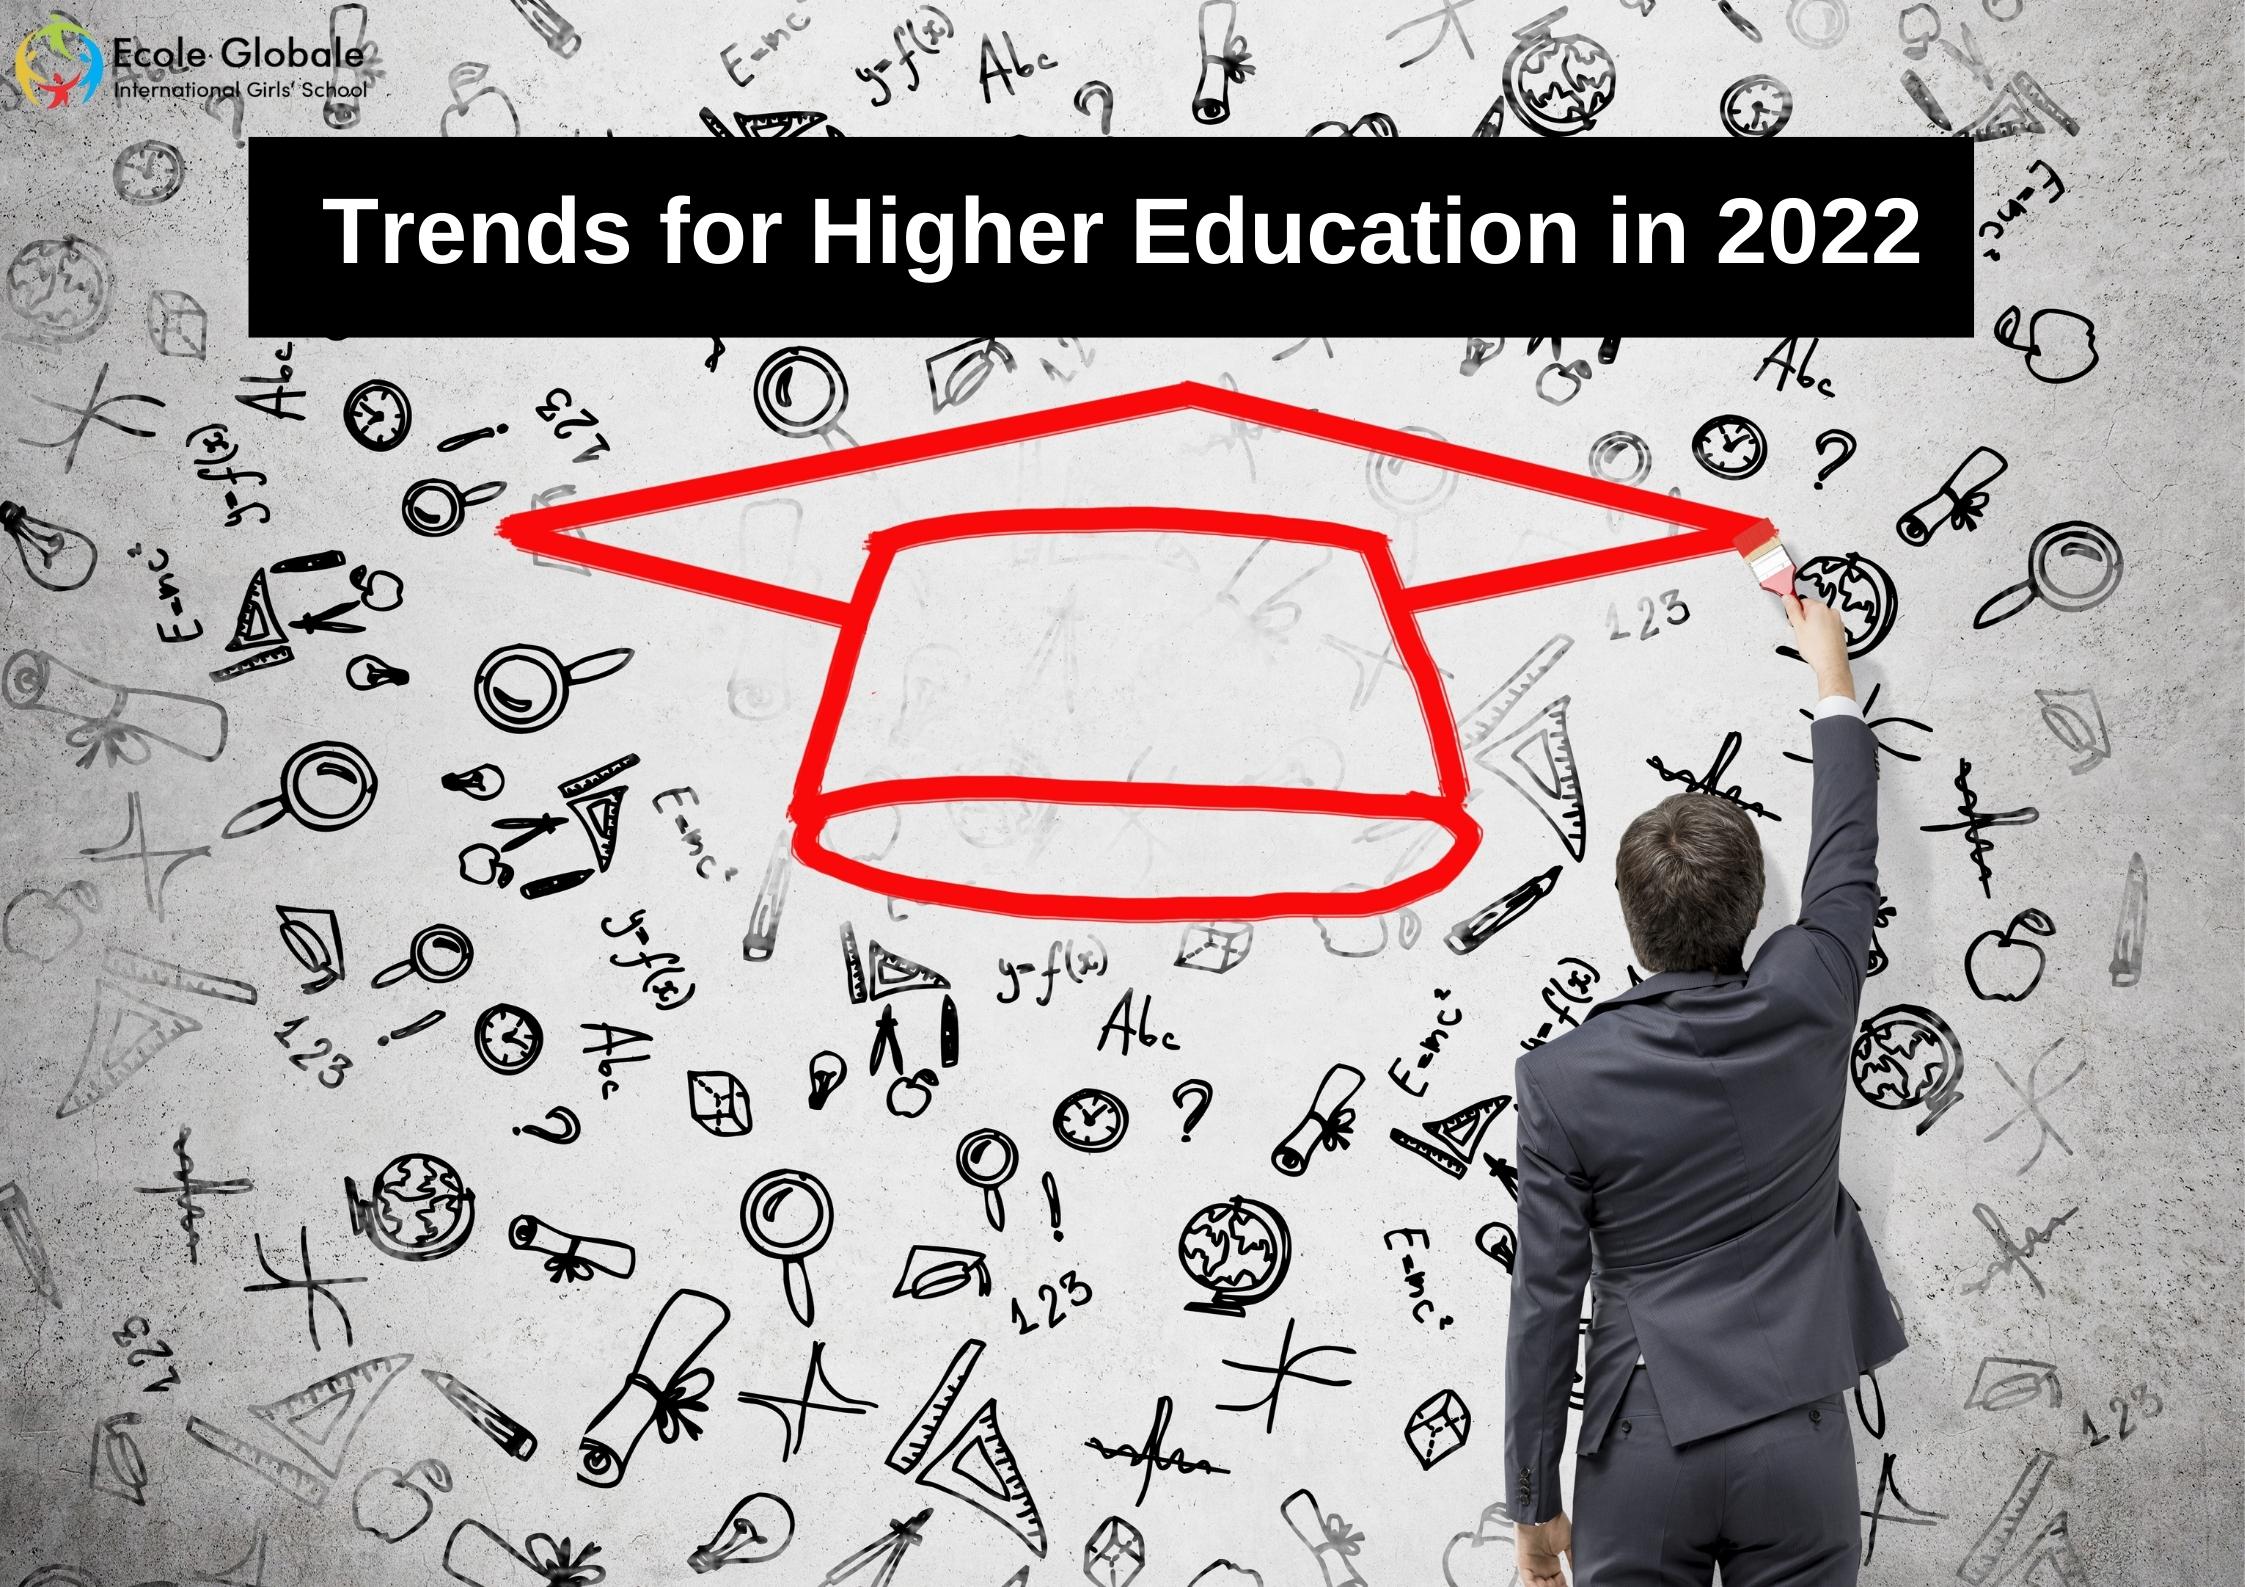 Trends for Higher Education in 2022